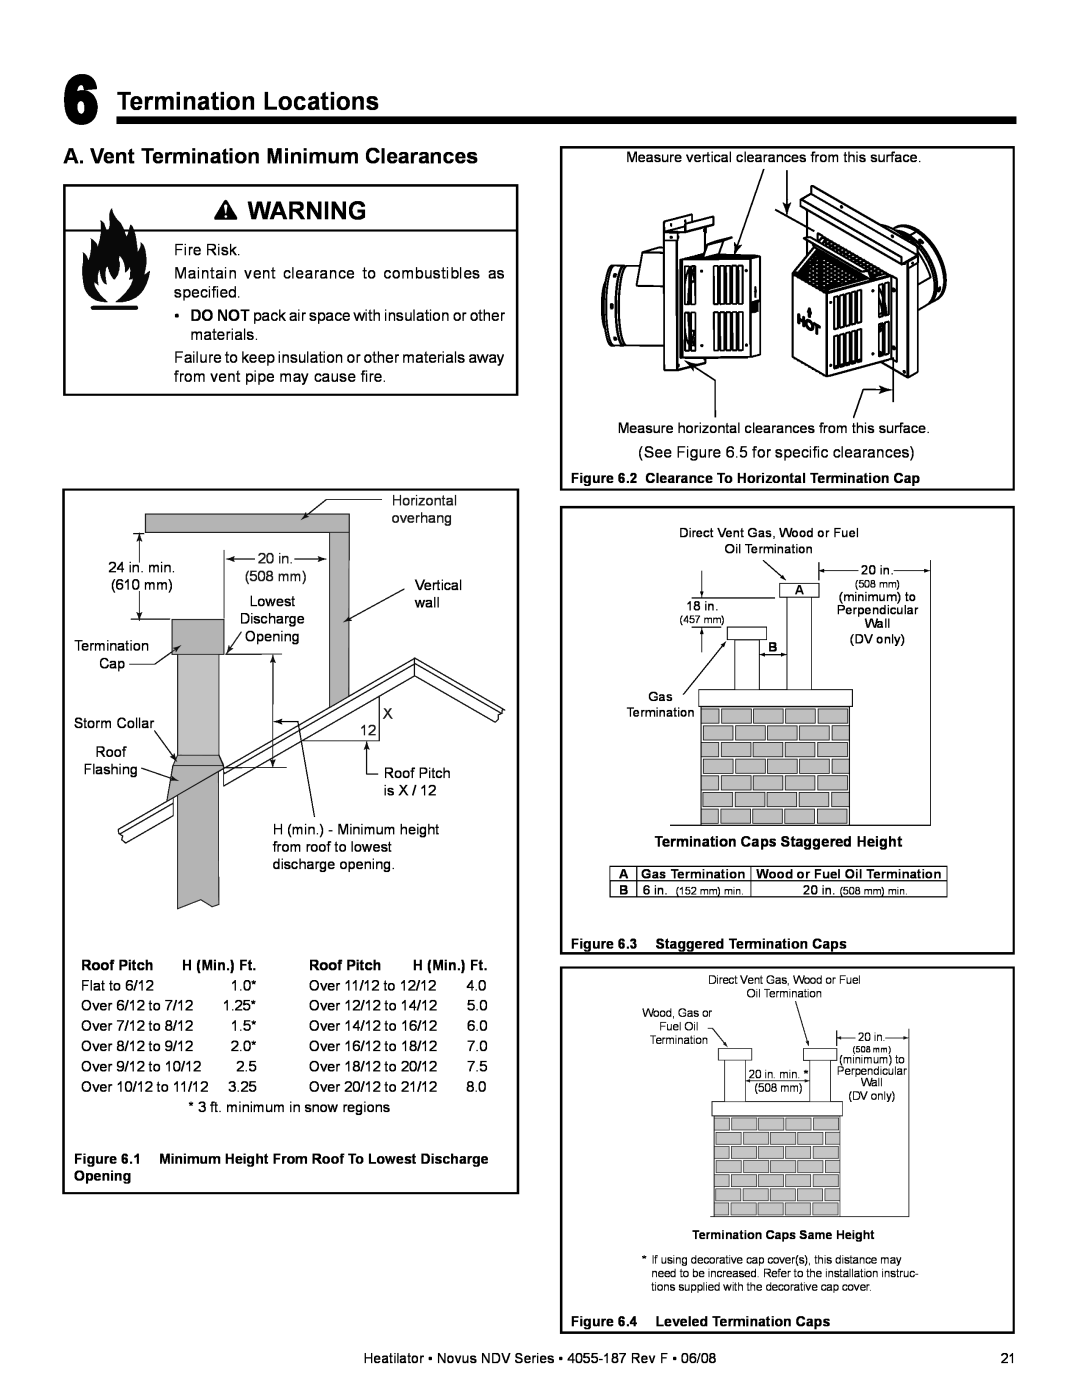 Hearth and Home Technologies NDV3933 Termination Locations, A. Vent Termination Minimum Clearances, Horizontal, overhang 